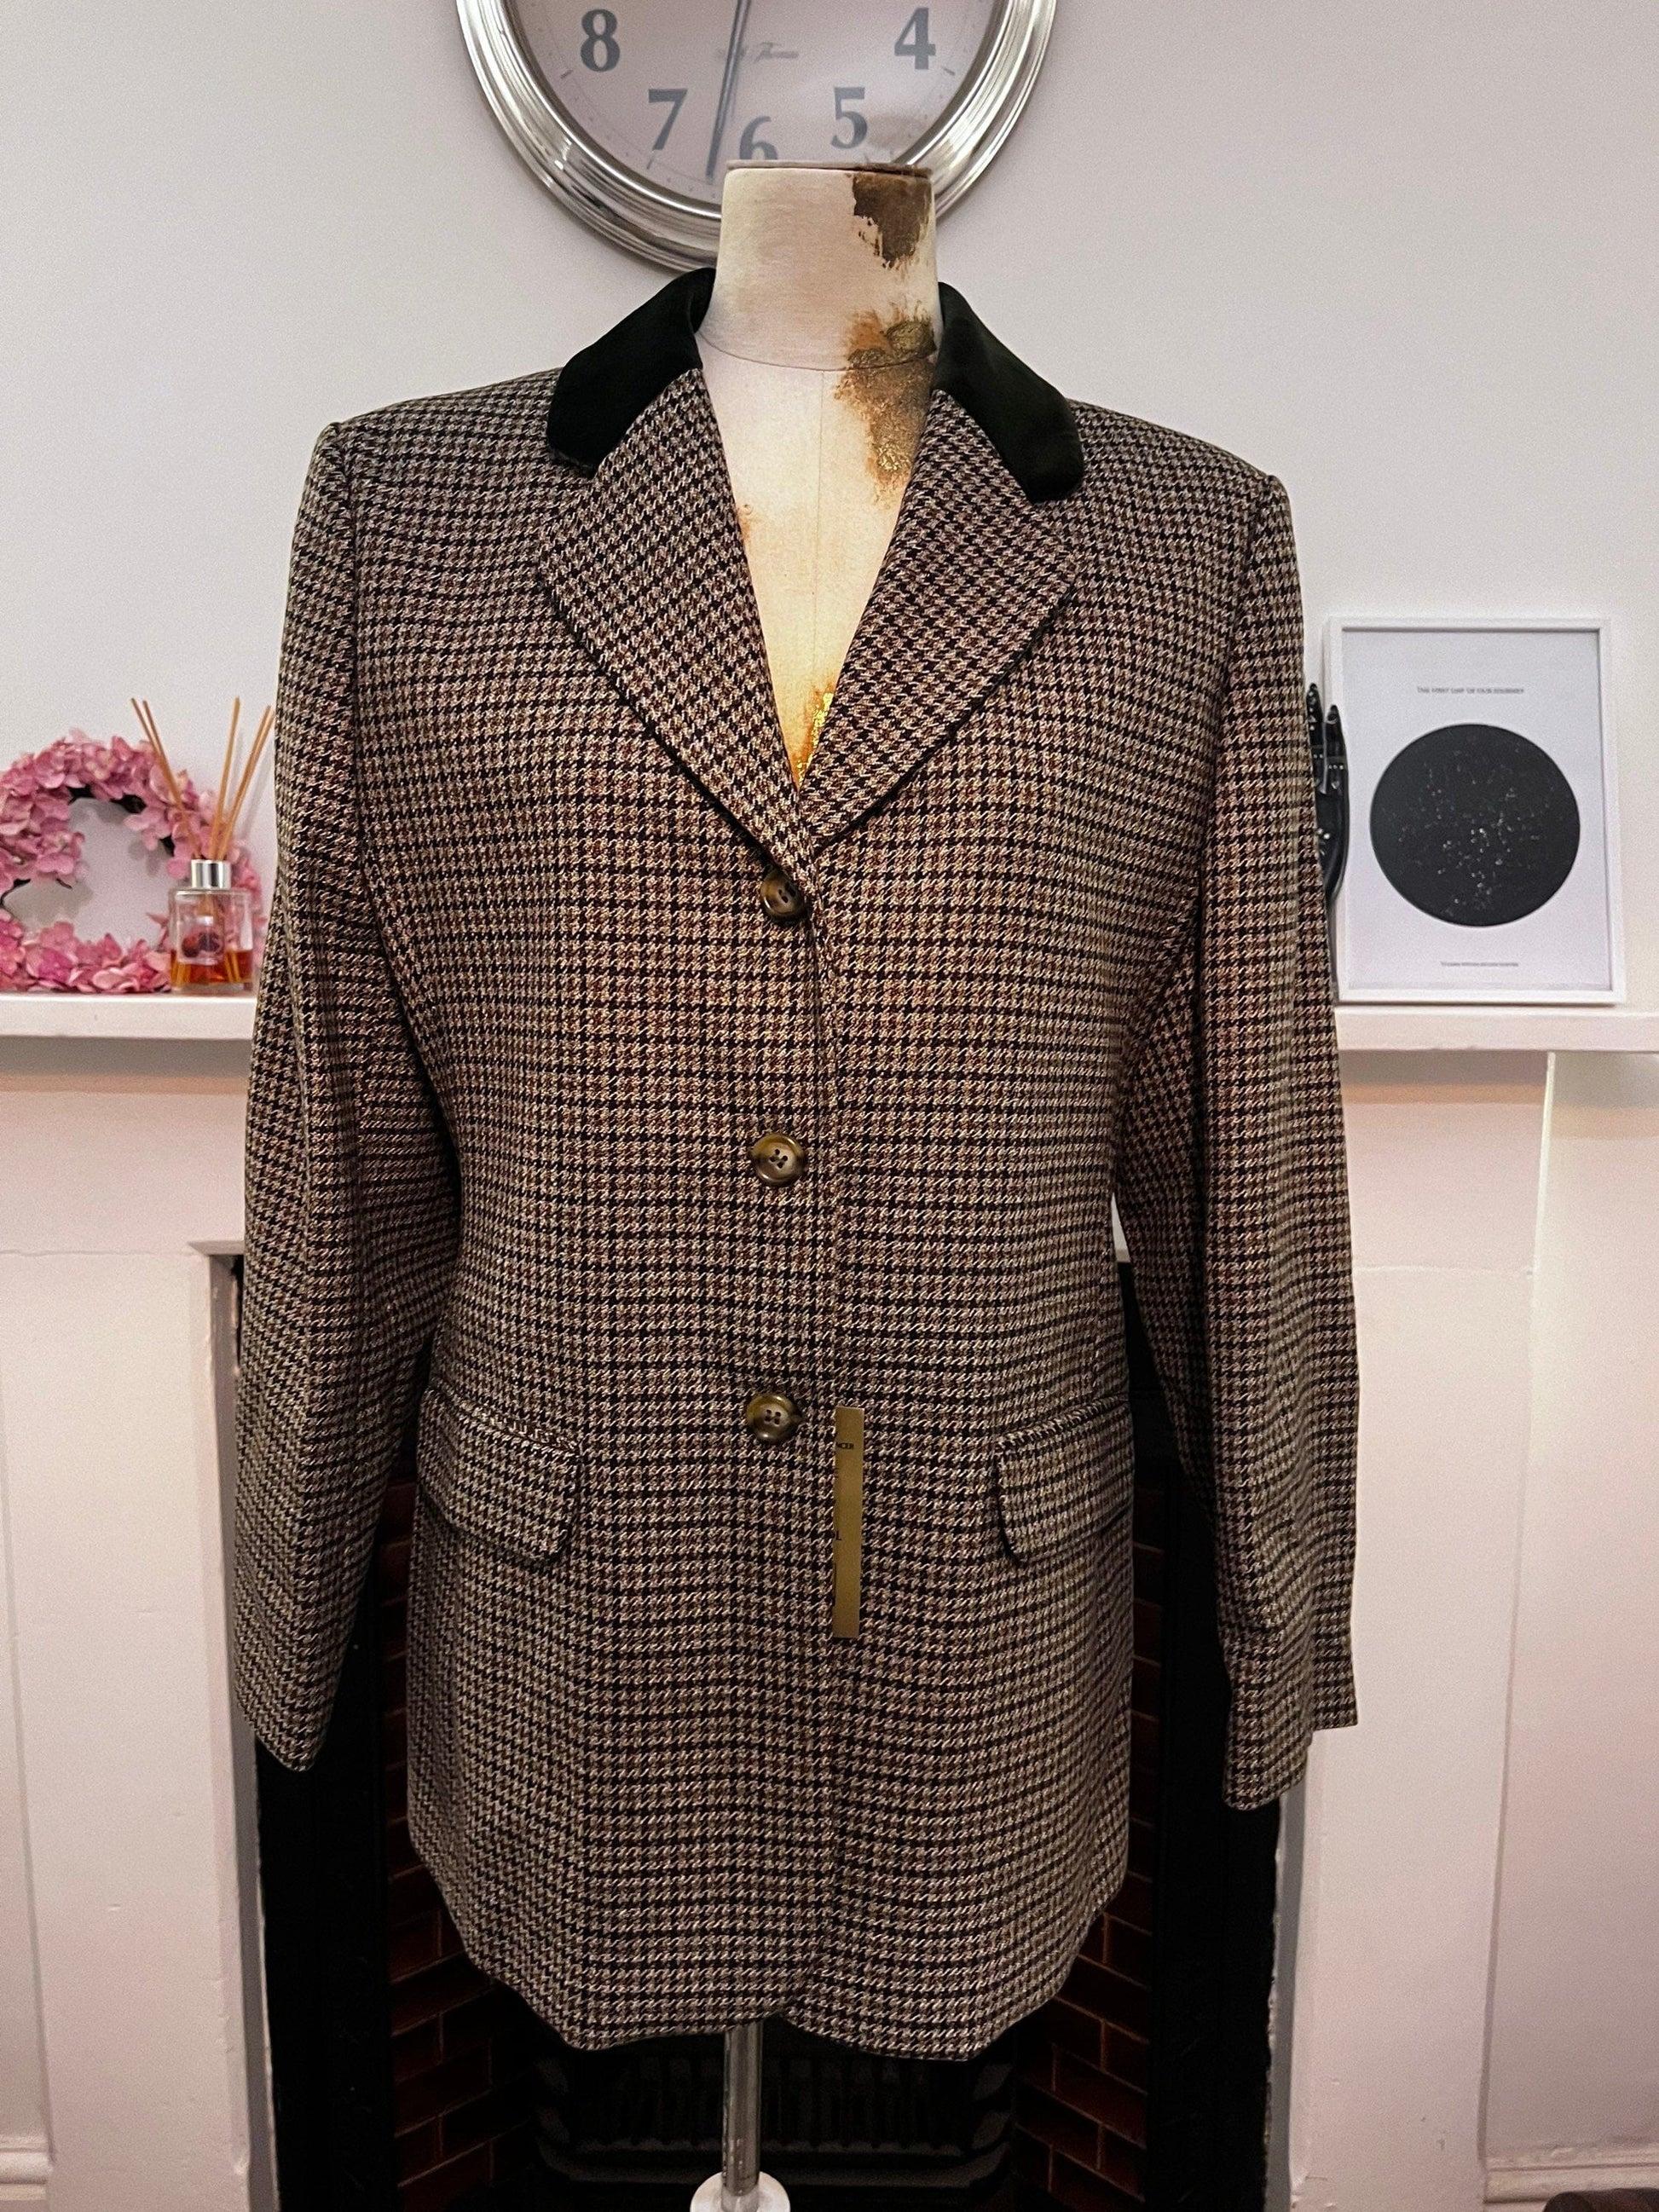 Vintage Green Tweed Blazer M&S Olive Green Tweed Houndstooth Blazer Jacket - Still includes tags from 1995 St Michael collection